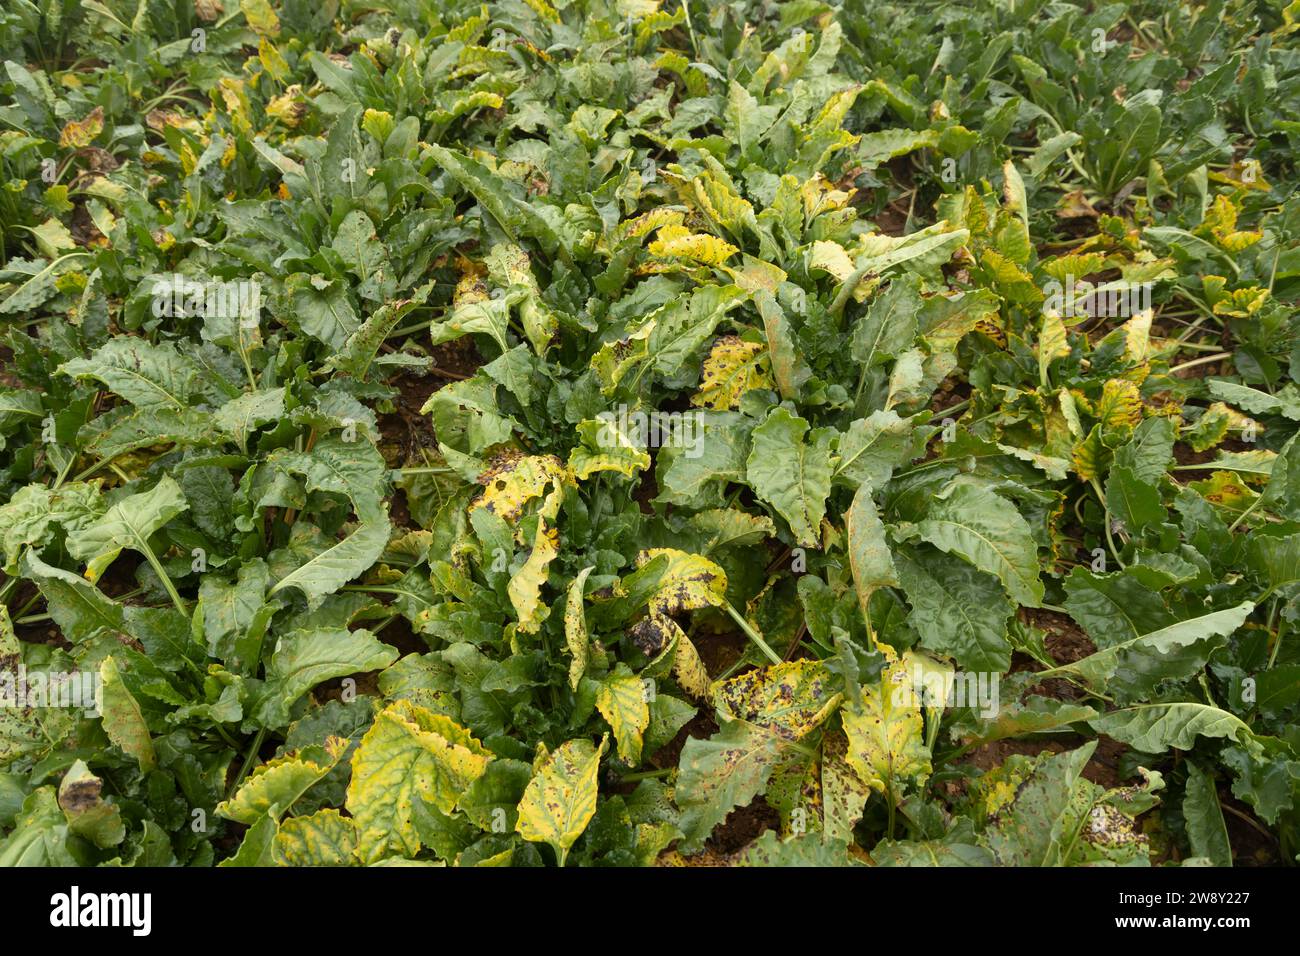 Sugar beet (Beta vulgaris) crop infected plants with virus yellows disease in an agricultural arable field, England, United Kingdom Stock Photo